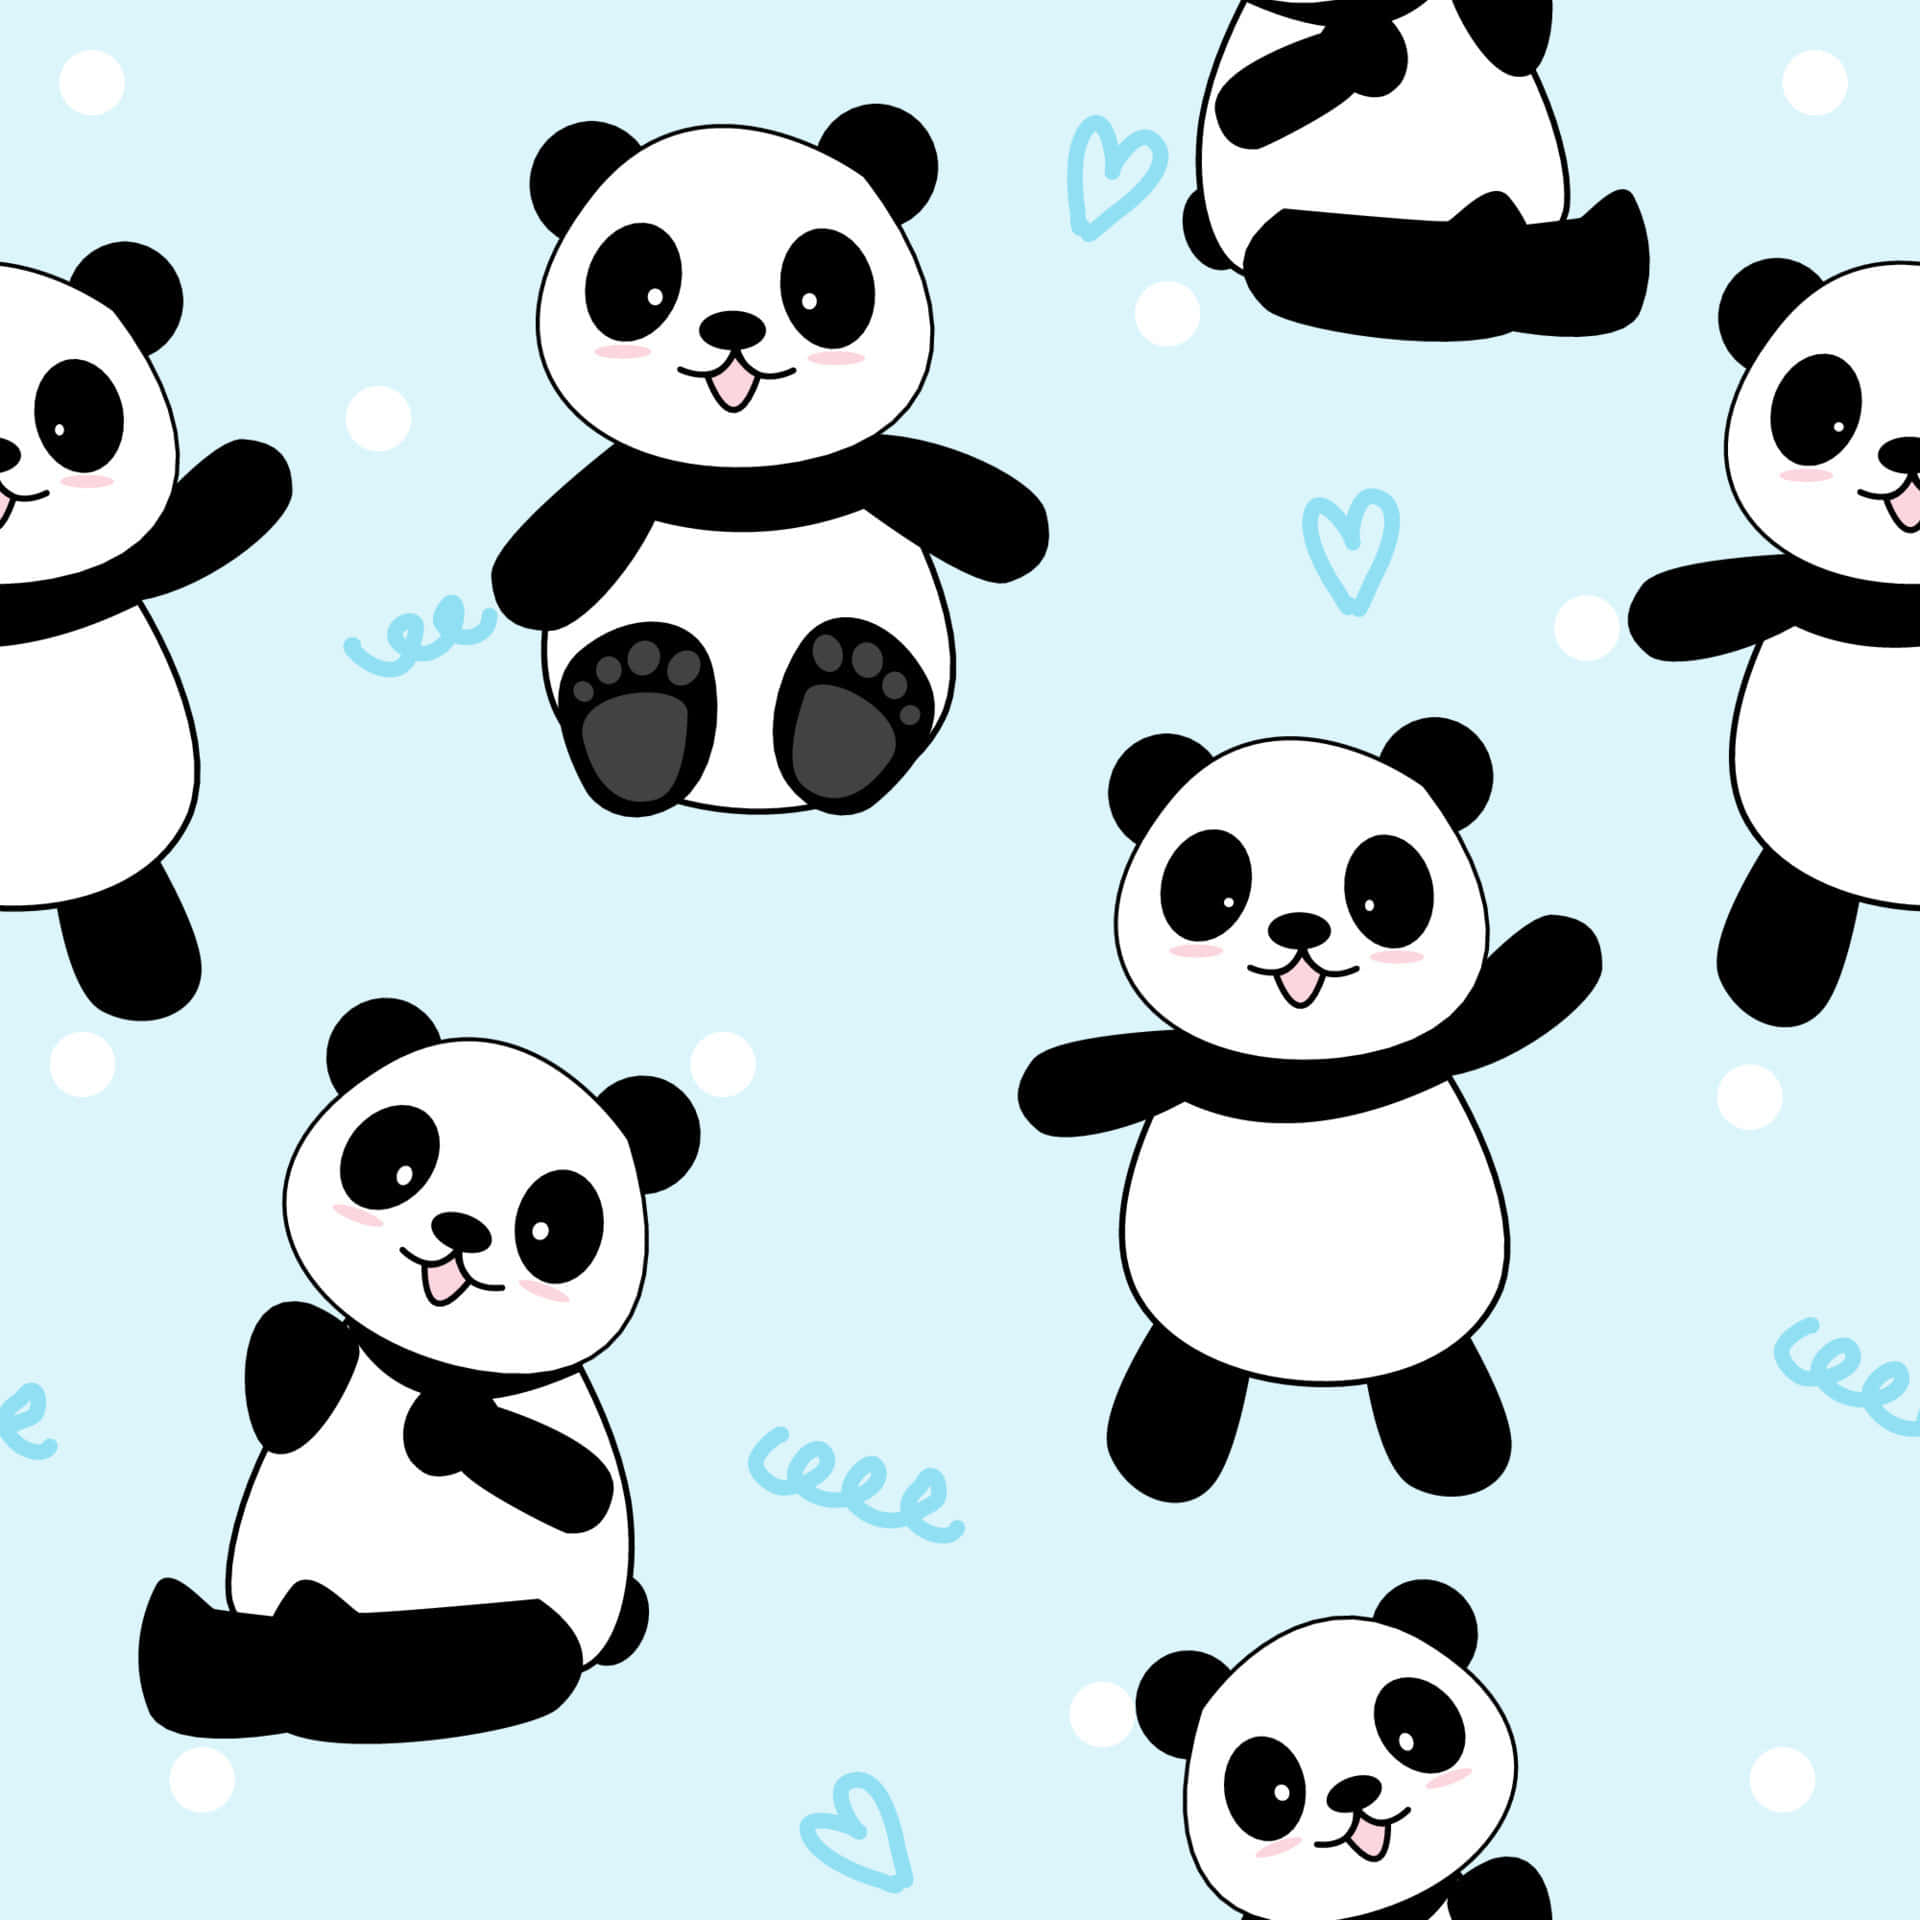 A Girly Panda showing off her beautiful smile and a fashionable polka-dot bow! Wallpaper